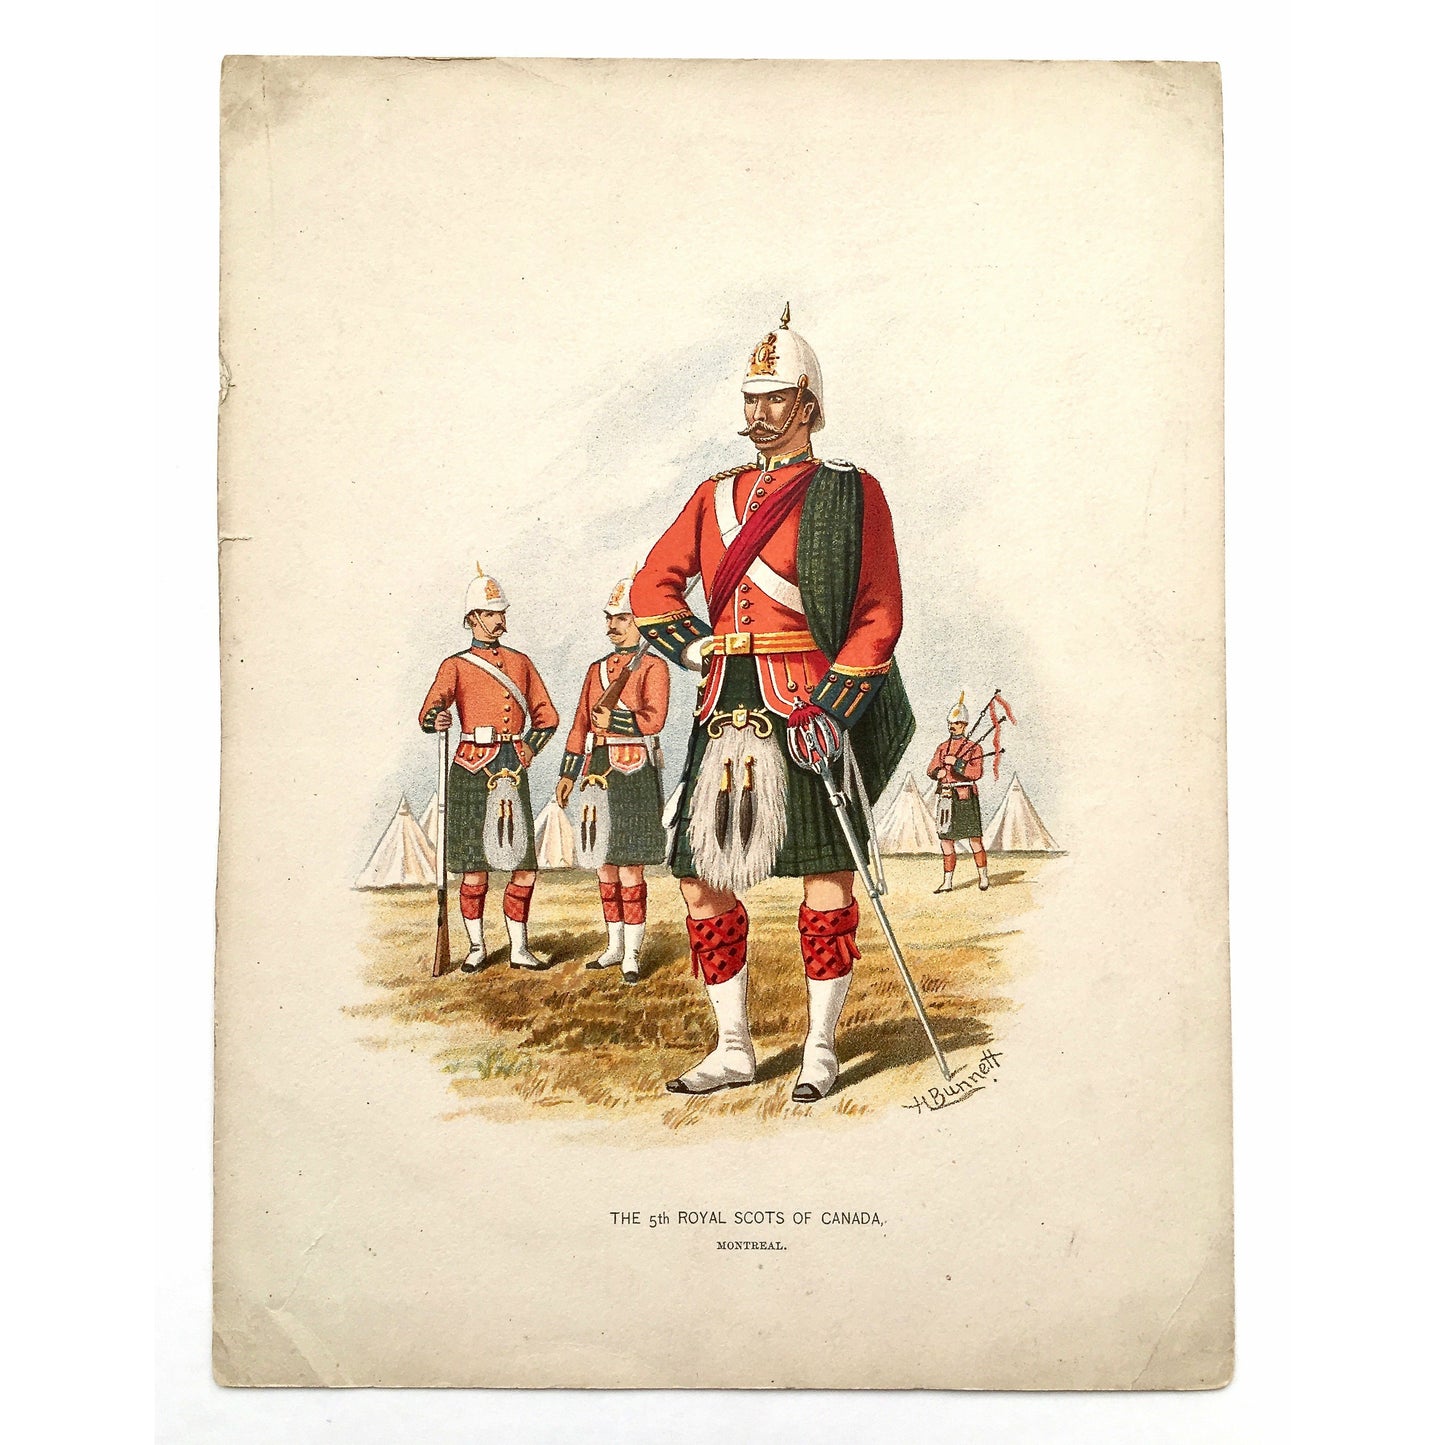 The 5th Royal Scots of Canada, Scots, Royal Scots, Scottish, Scotland, Kilts, bagpipes, Montreal, Canada, Artillery, Military, Military Costume, Horses, Riding, Costume, Uniform, Her Majesty's Army, Regiments, Queen's Forces, H. Bunnett, Bunnett, Sword, Army, London, 1890, Military Prints, Canadian, Canadian Military, Canadian Army, Armed Forces, Military Uniform, Chromolithograph, J. S. Virtue & Co., Antique, Prints, Original, Office Art, Interior design, Interior decorating, Decor, Design, Art, Home decor